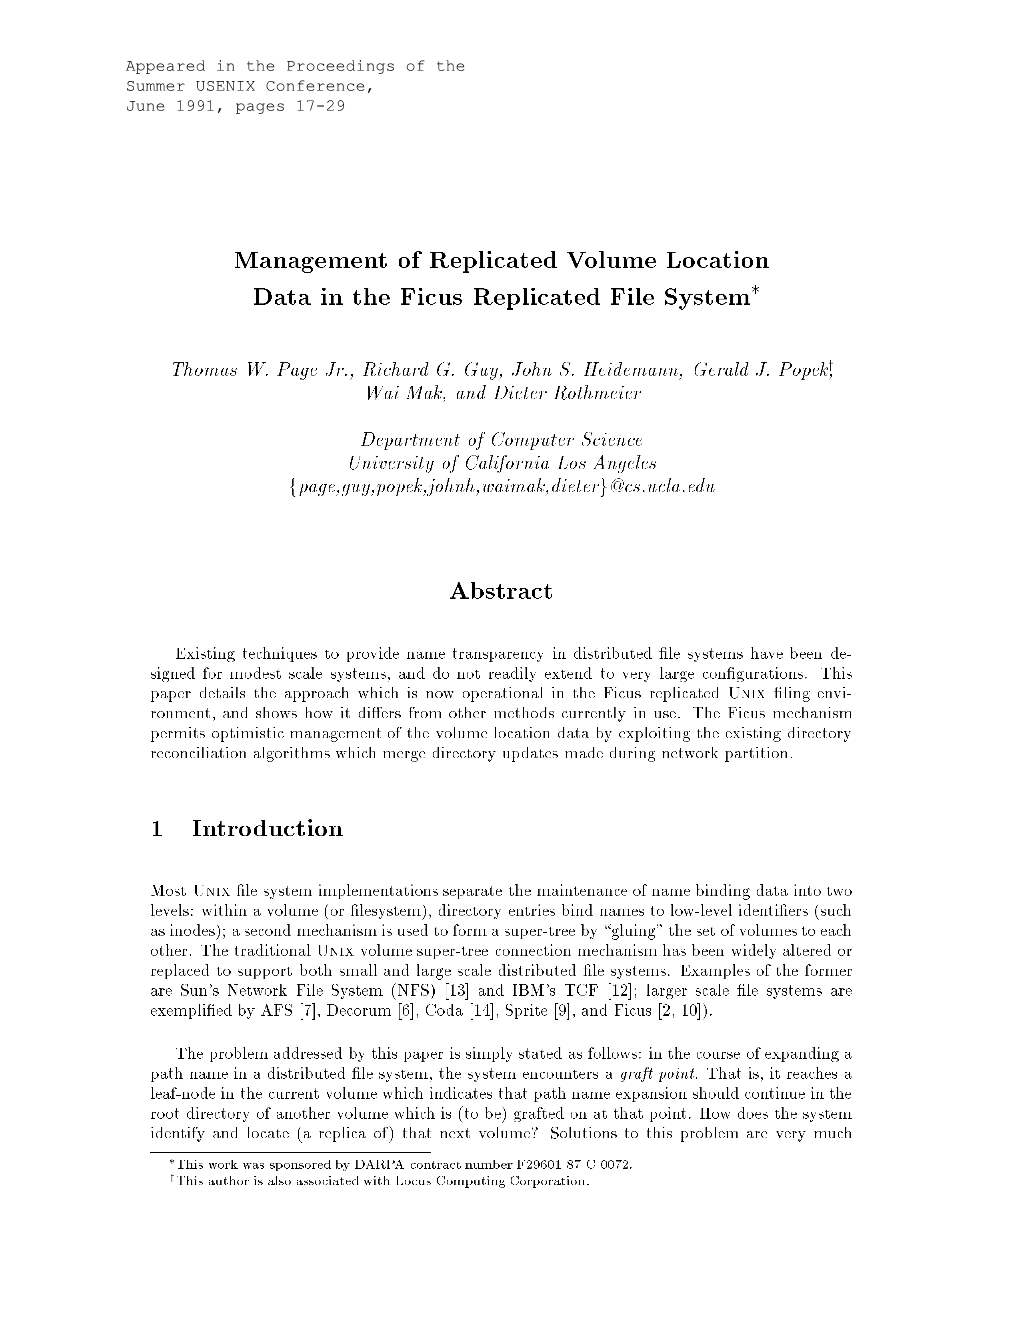 Management of Replicated Volume Location Data in the Ficus